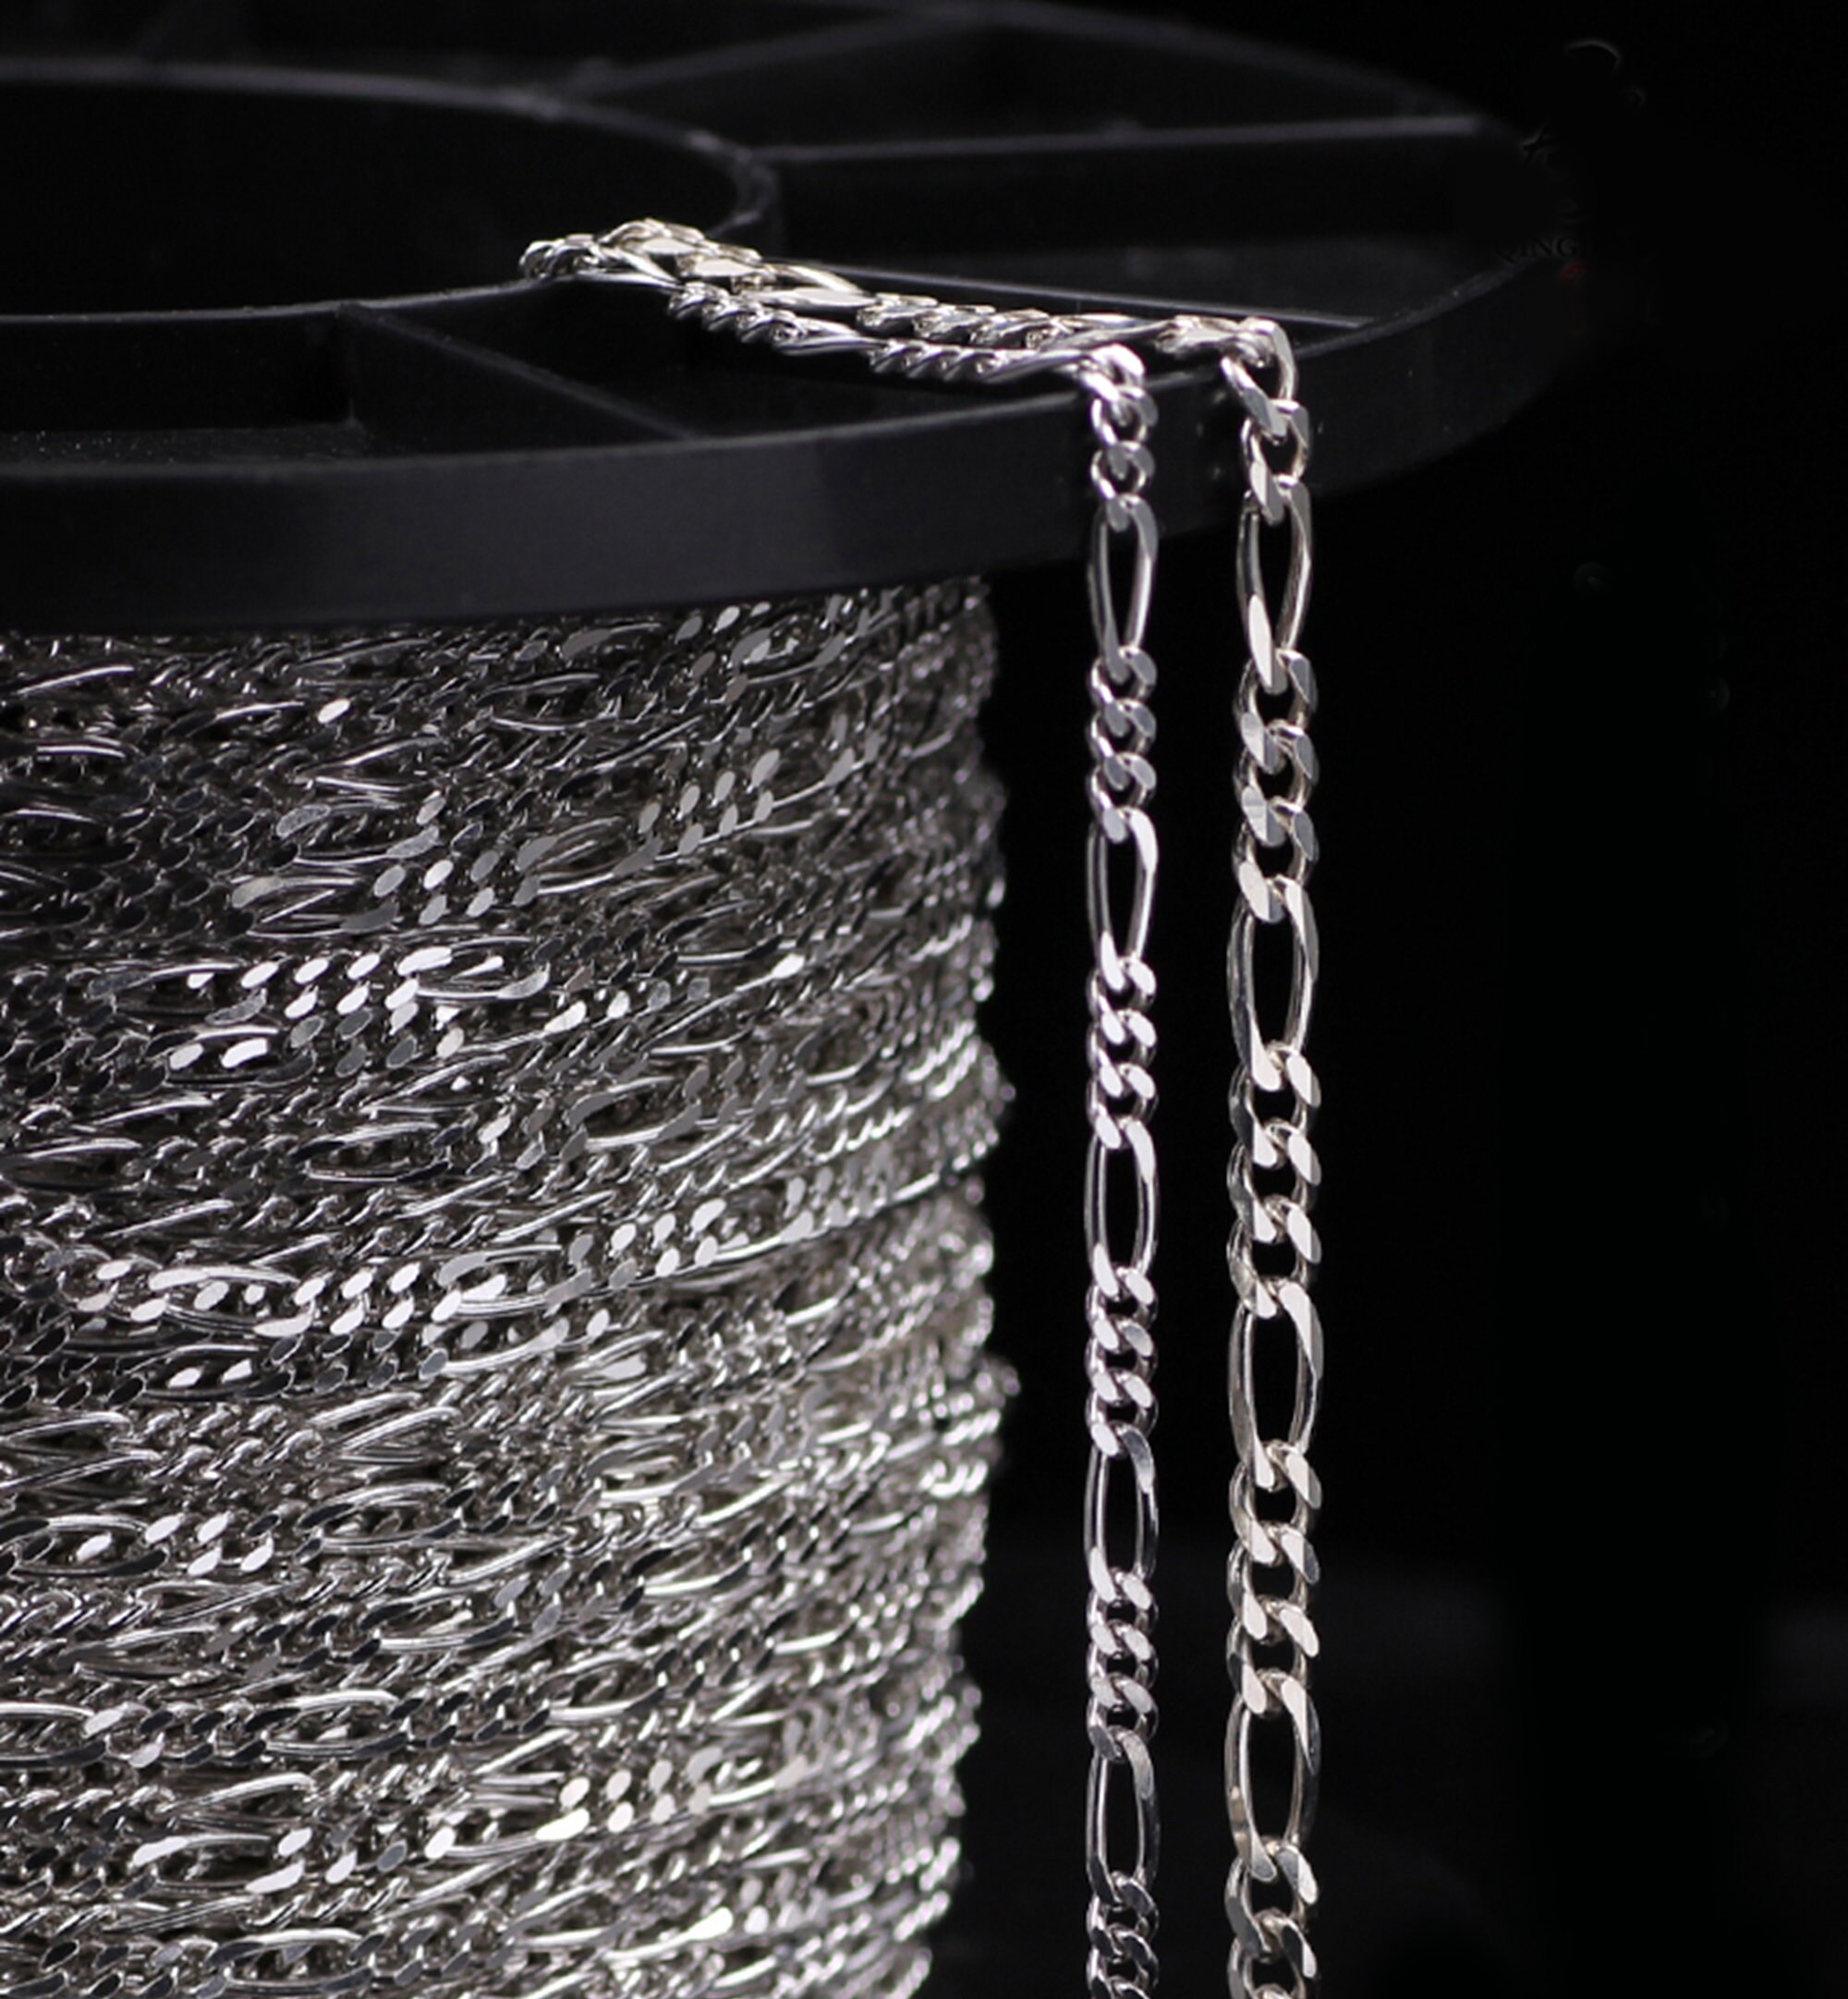 1-50 Meters Silver Chain for Jewelry Making Sterling Silver Plated